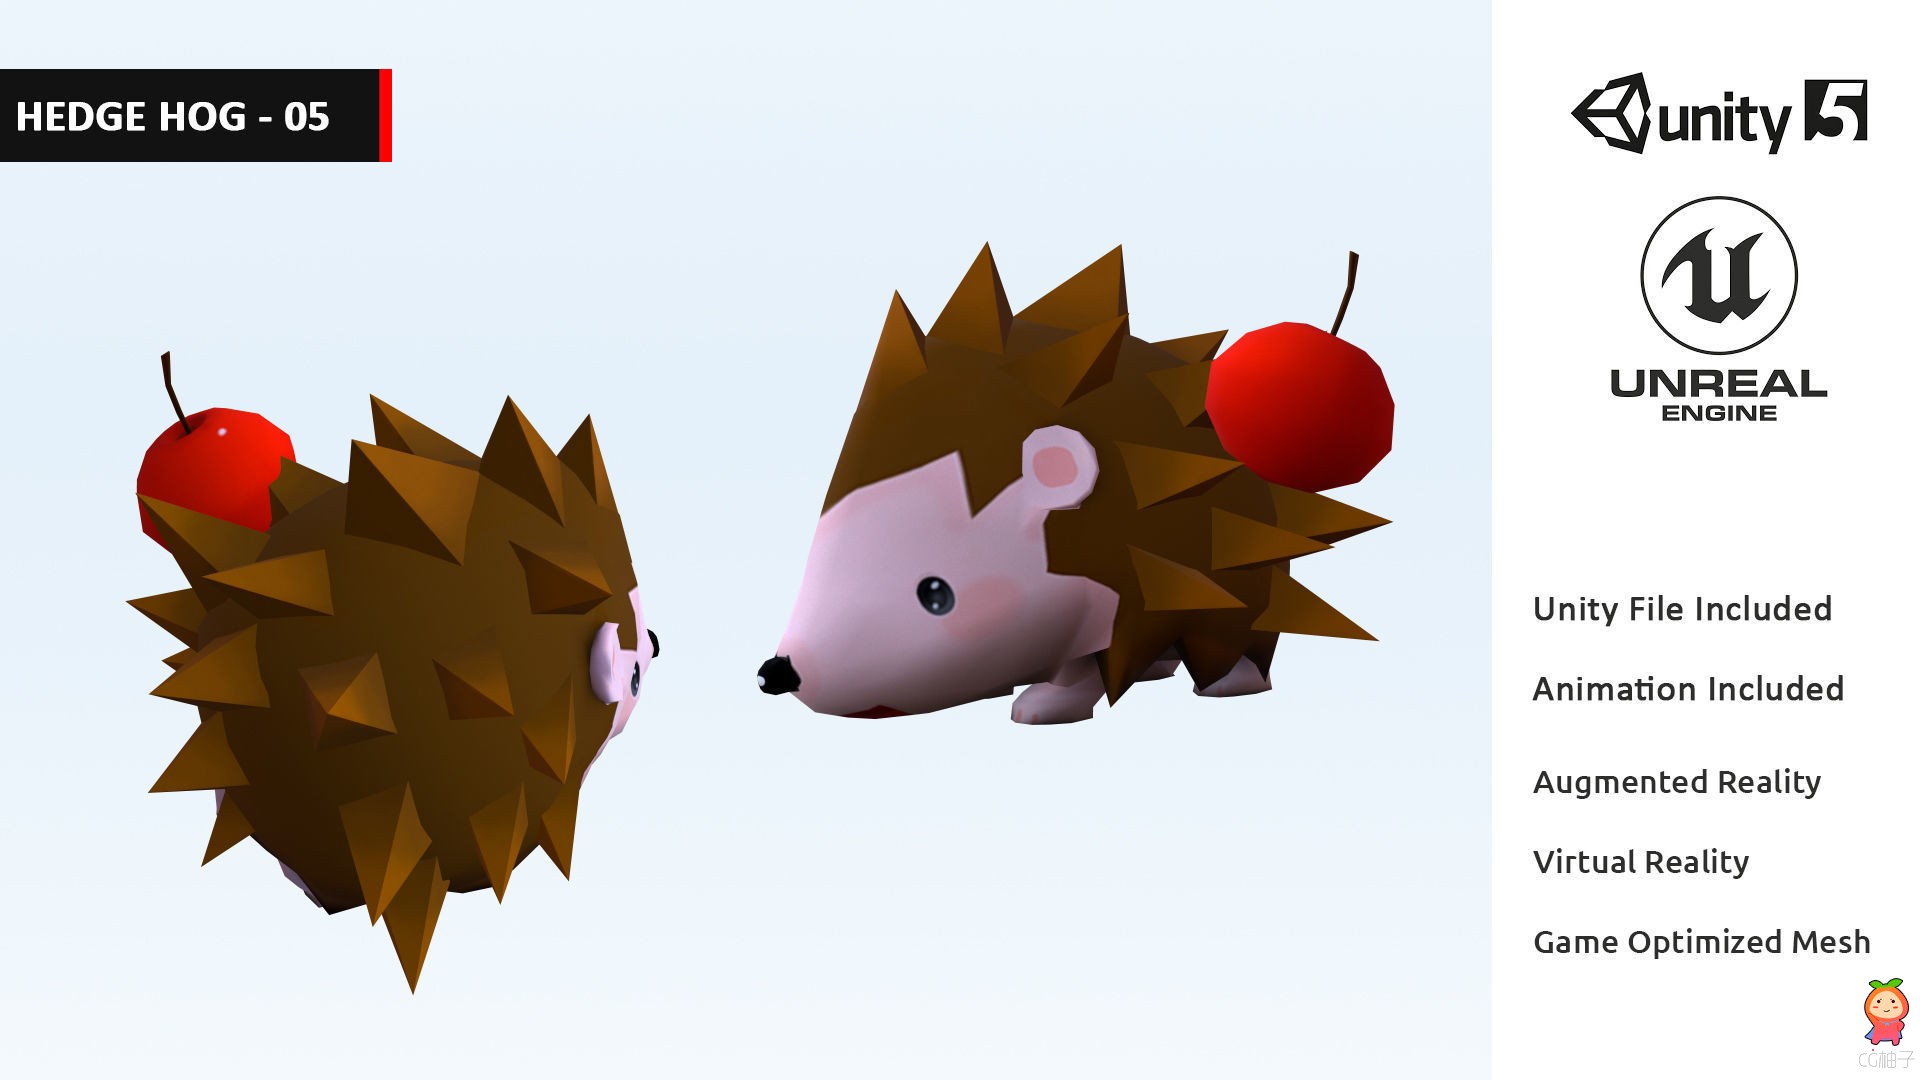 cartoon-cute-animals-low-poly-pack-01-ar-vr-games-movies-3d-model-low-poly-anima.jpg